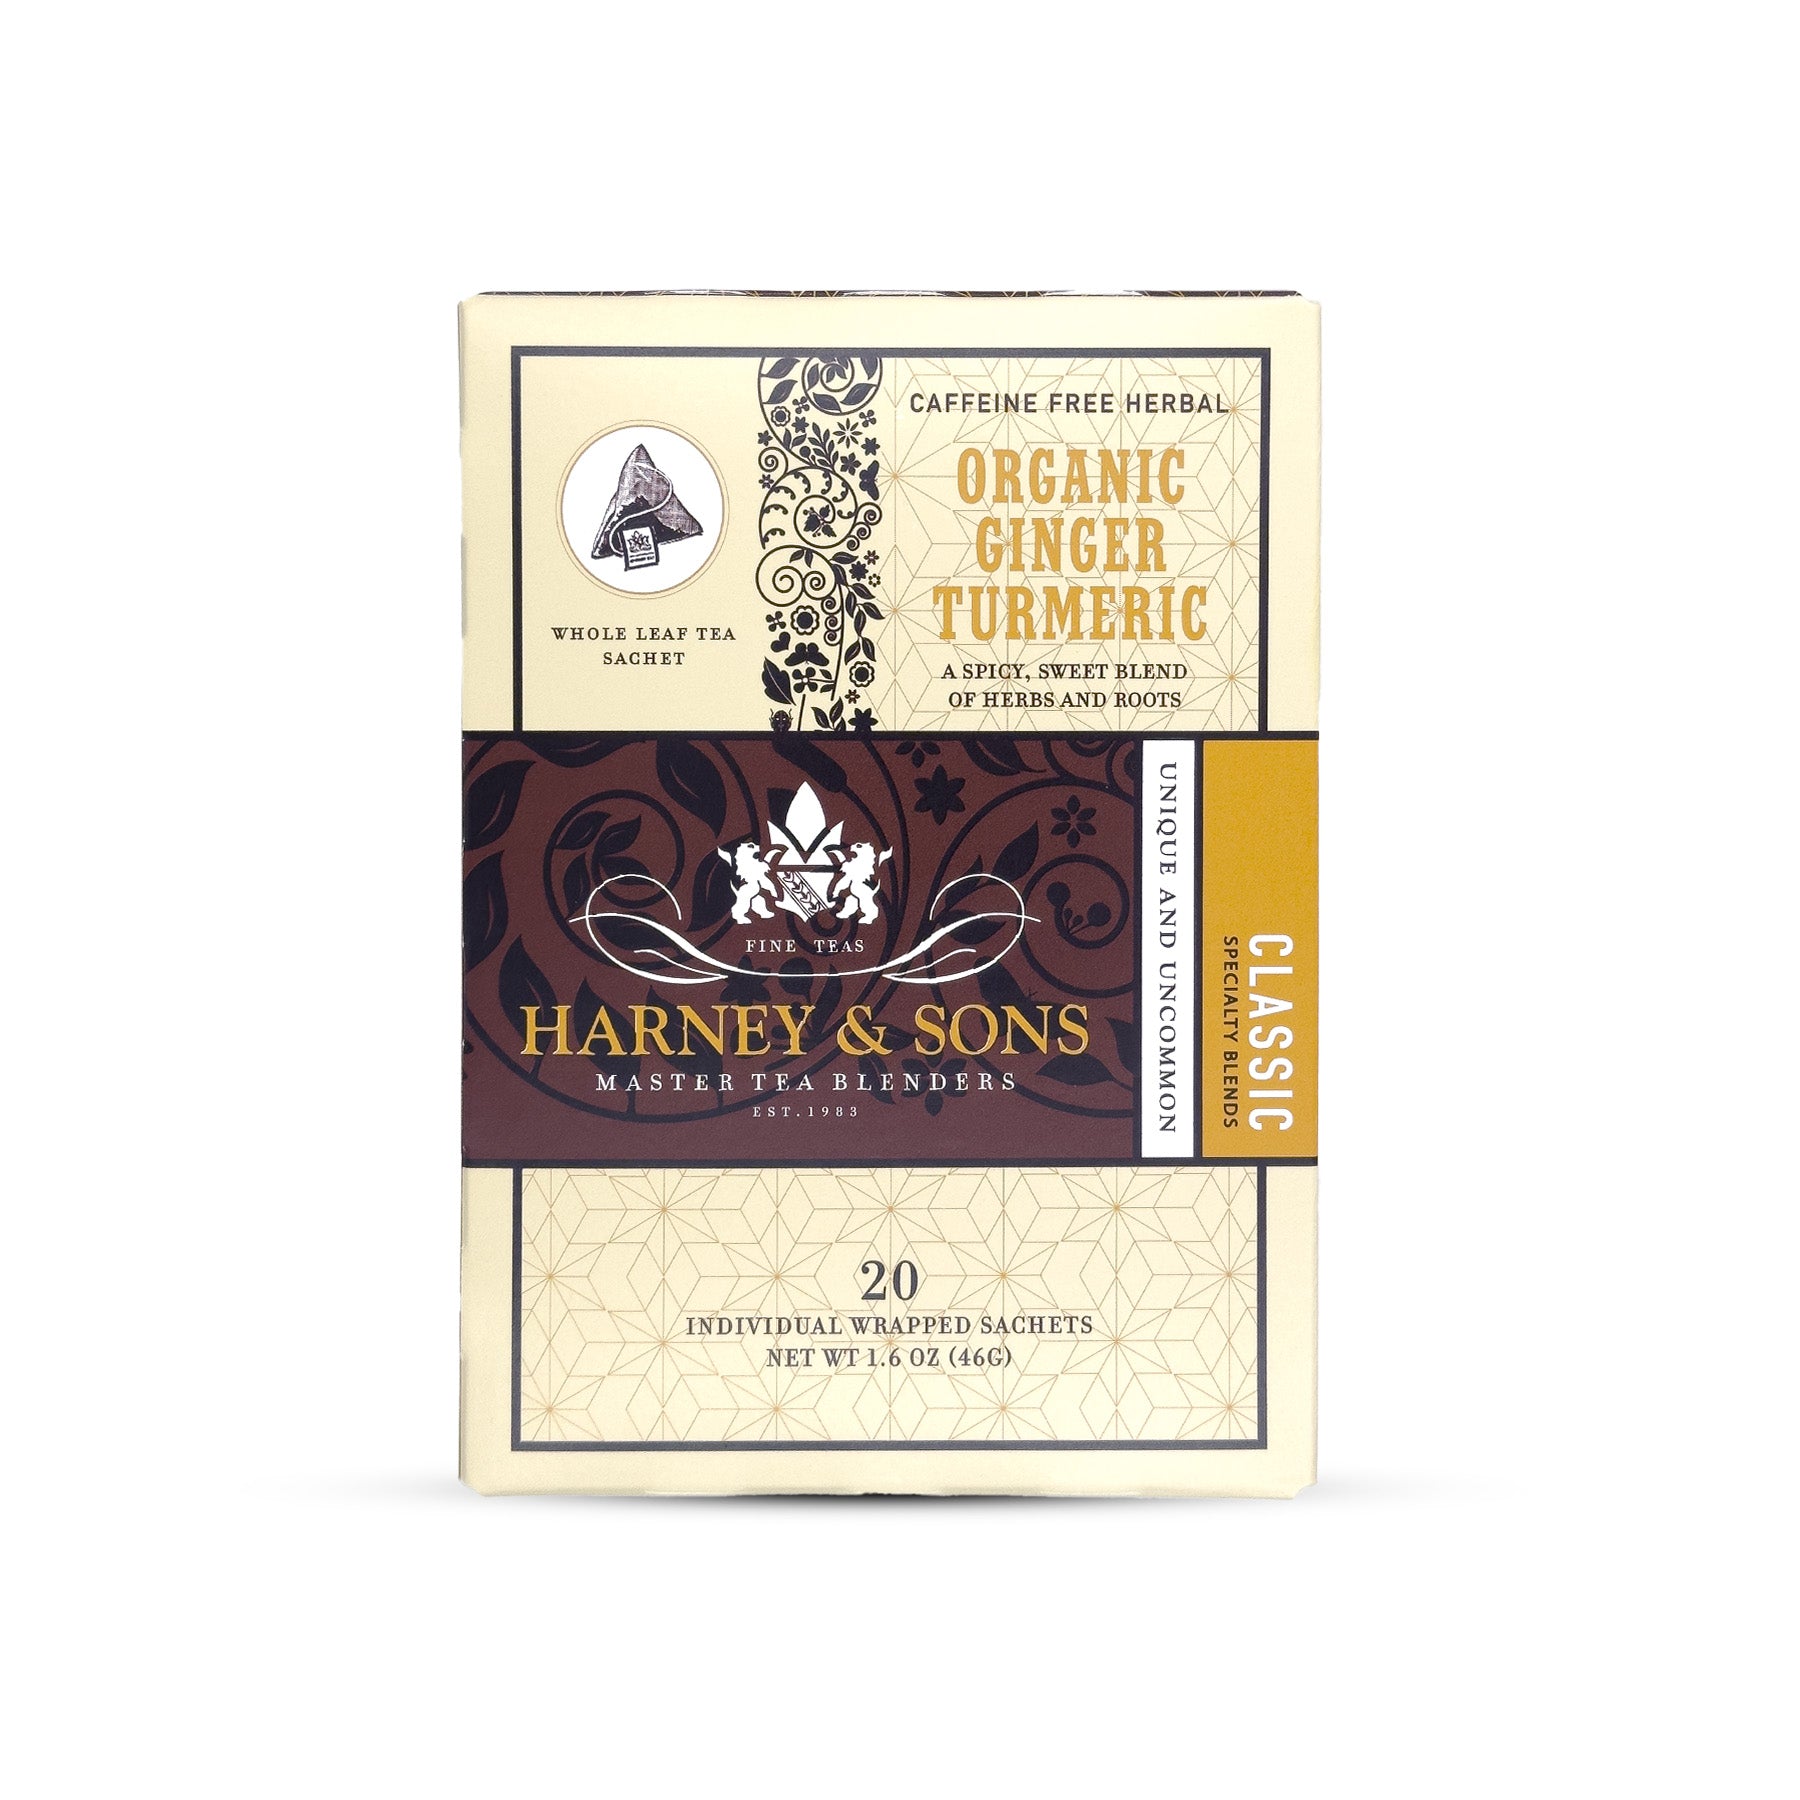 Organic Ginger Turmeric, Box of 20 Individually Wrapped Sachets - Harney & Sons Fine Teas Europe